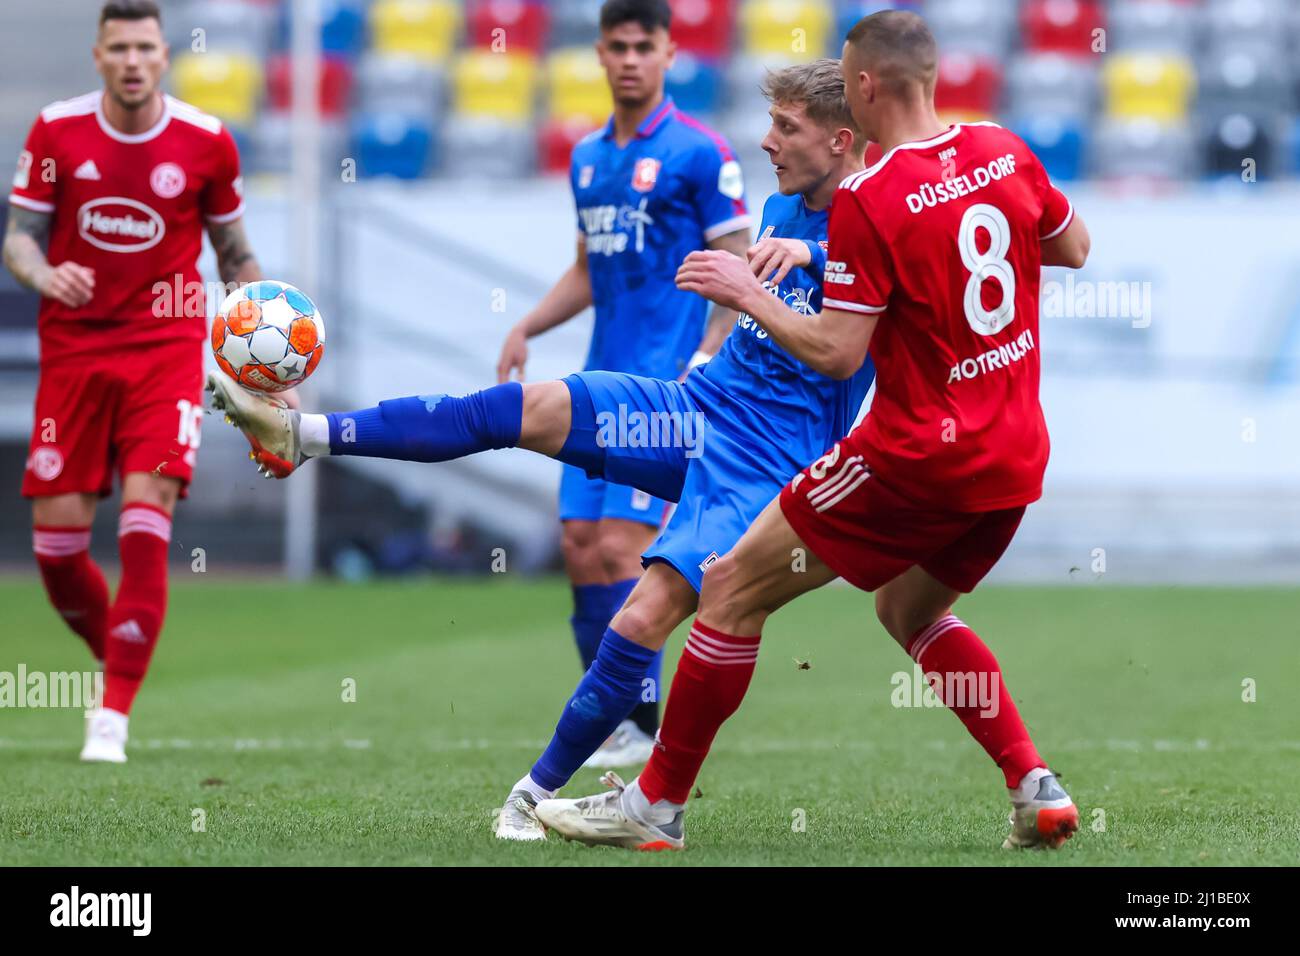 DUSSELDORF, GERMANY - MARCH 24: Jesse Bosch of FC Twente controls the ball during the Friendly match between Fortuna Dusseldorf and FC Twente at the Merkur Spielarena on March 24, 2022 in Dusseldorf, Germany (Photo by Marcel ter Bals/Orange Pictures) Stock Photo